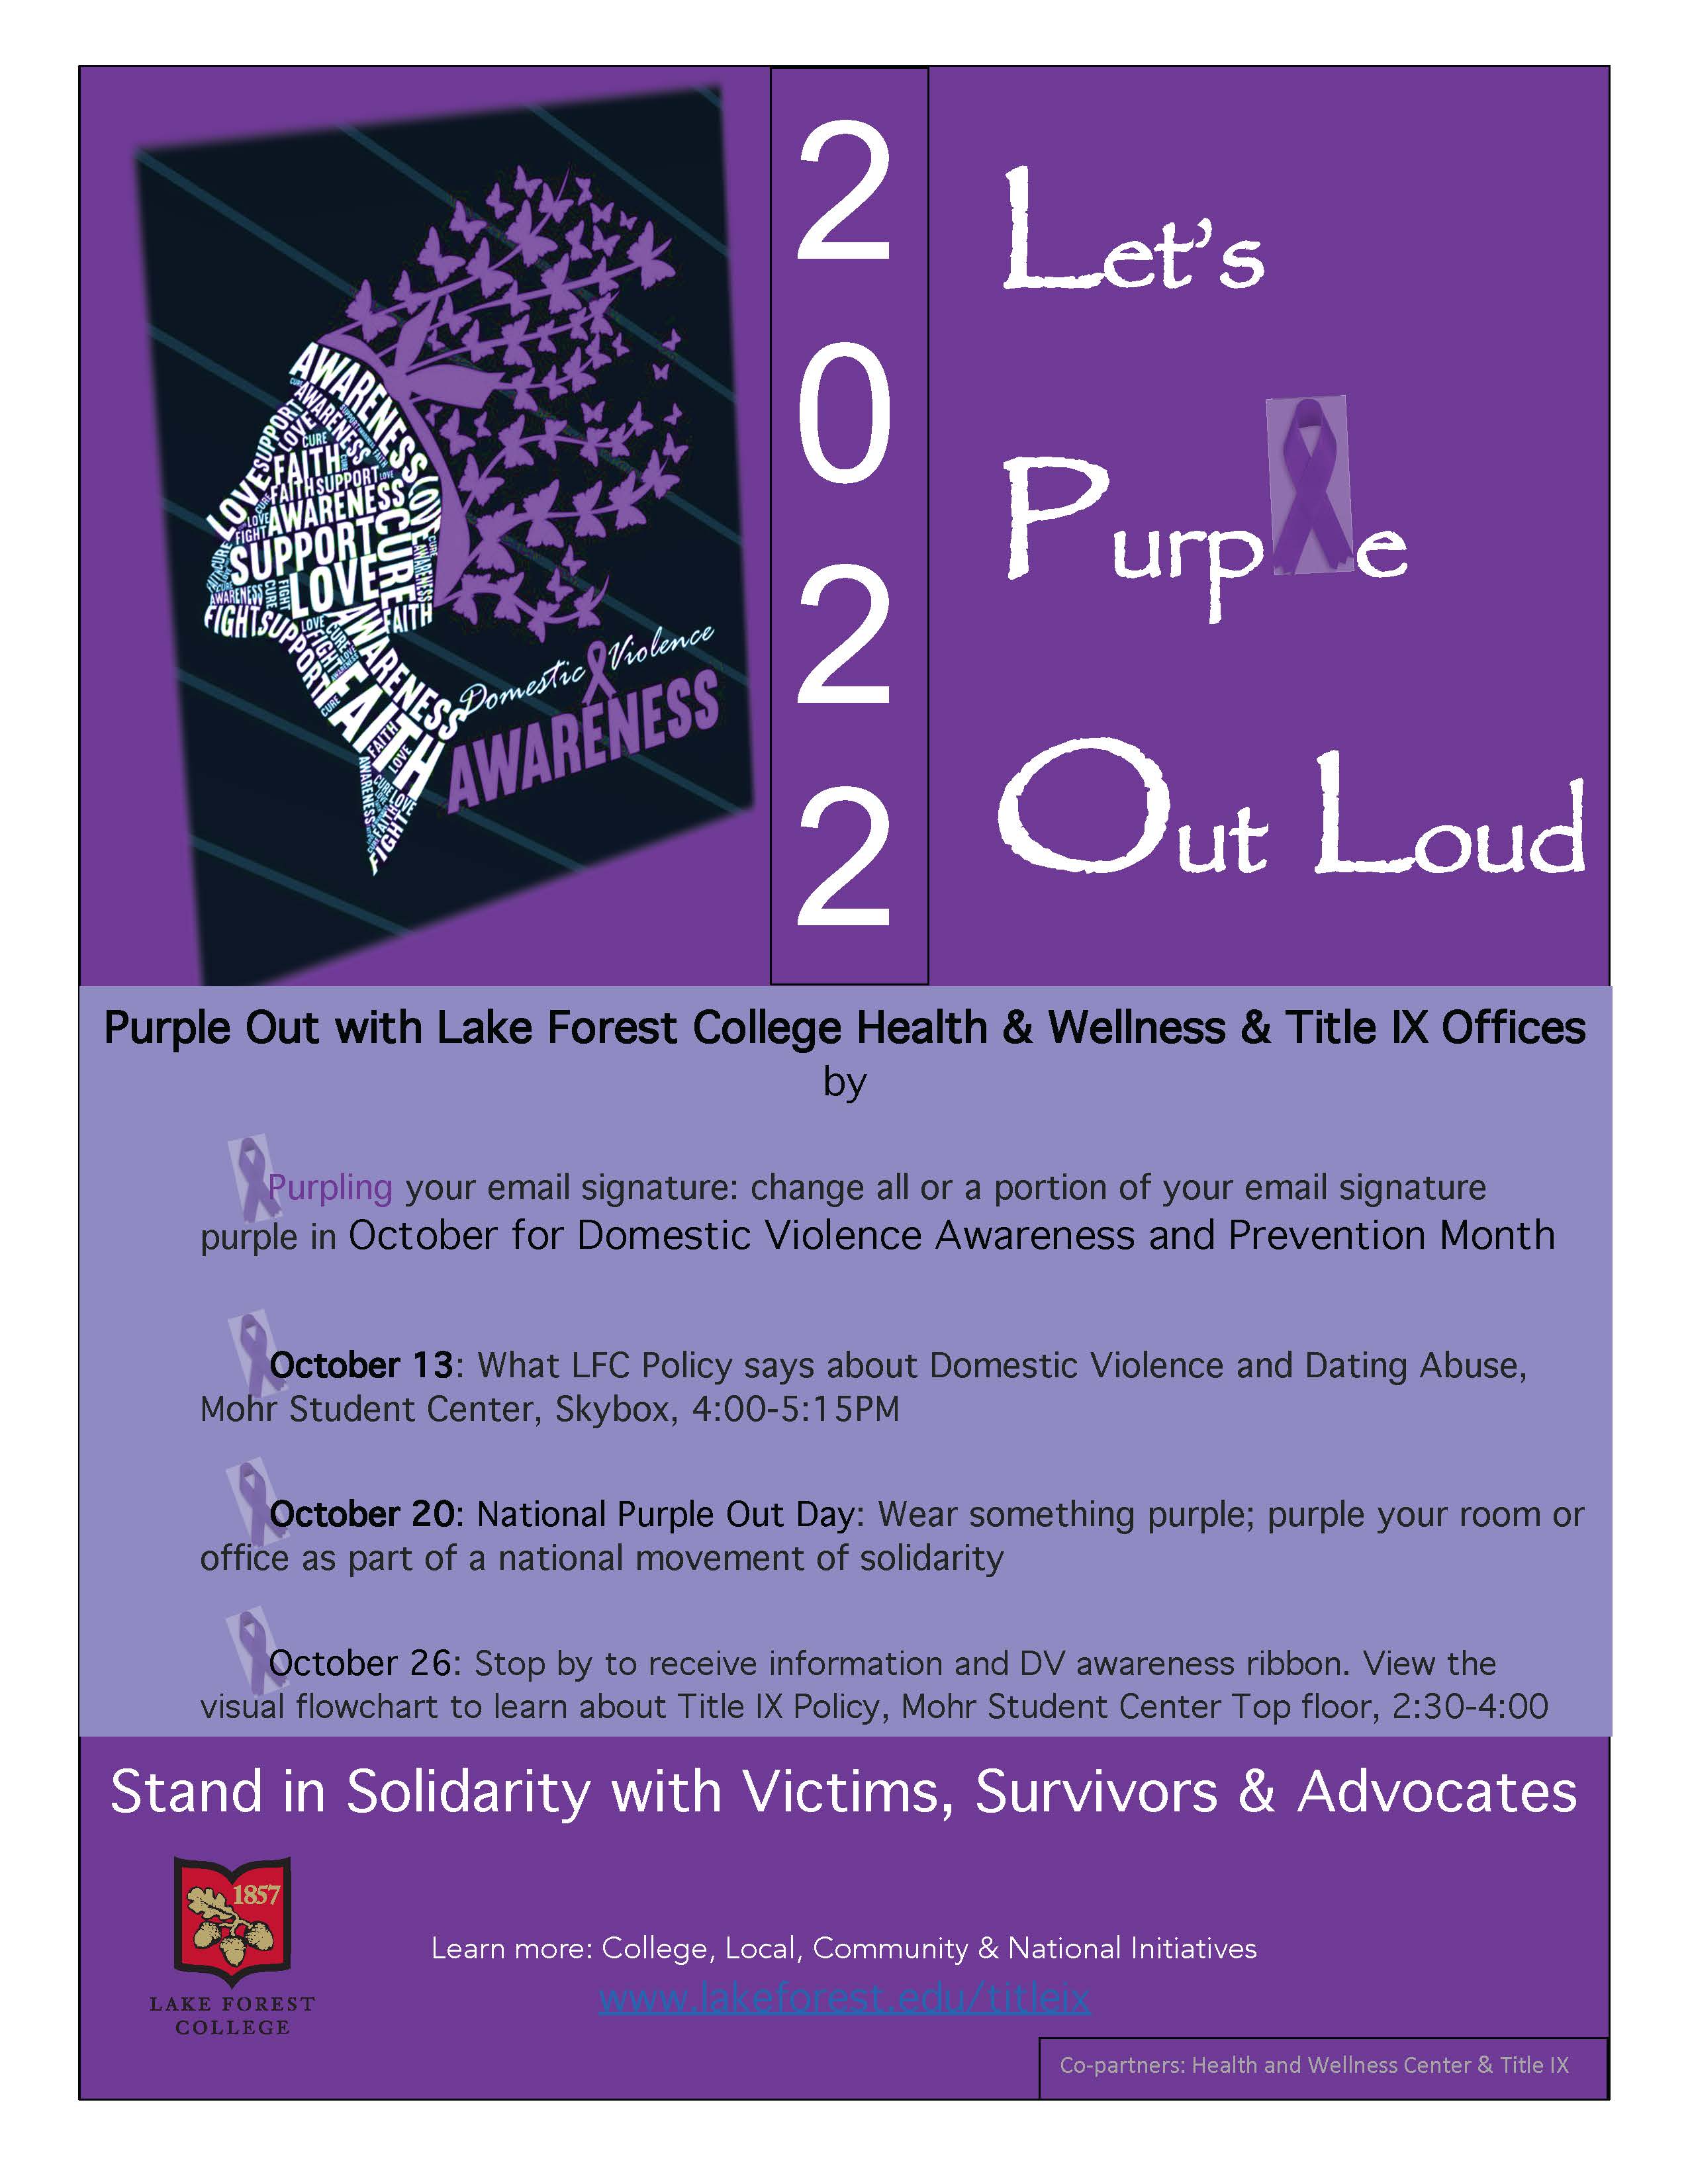 Domestic Violence Awareness Month Flyer-2022